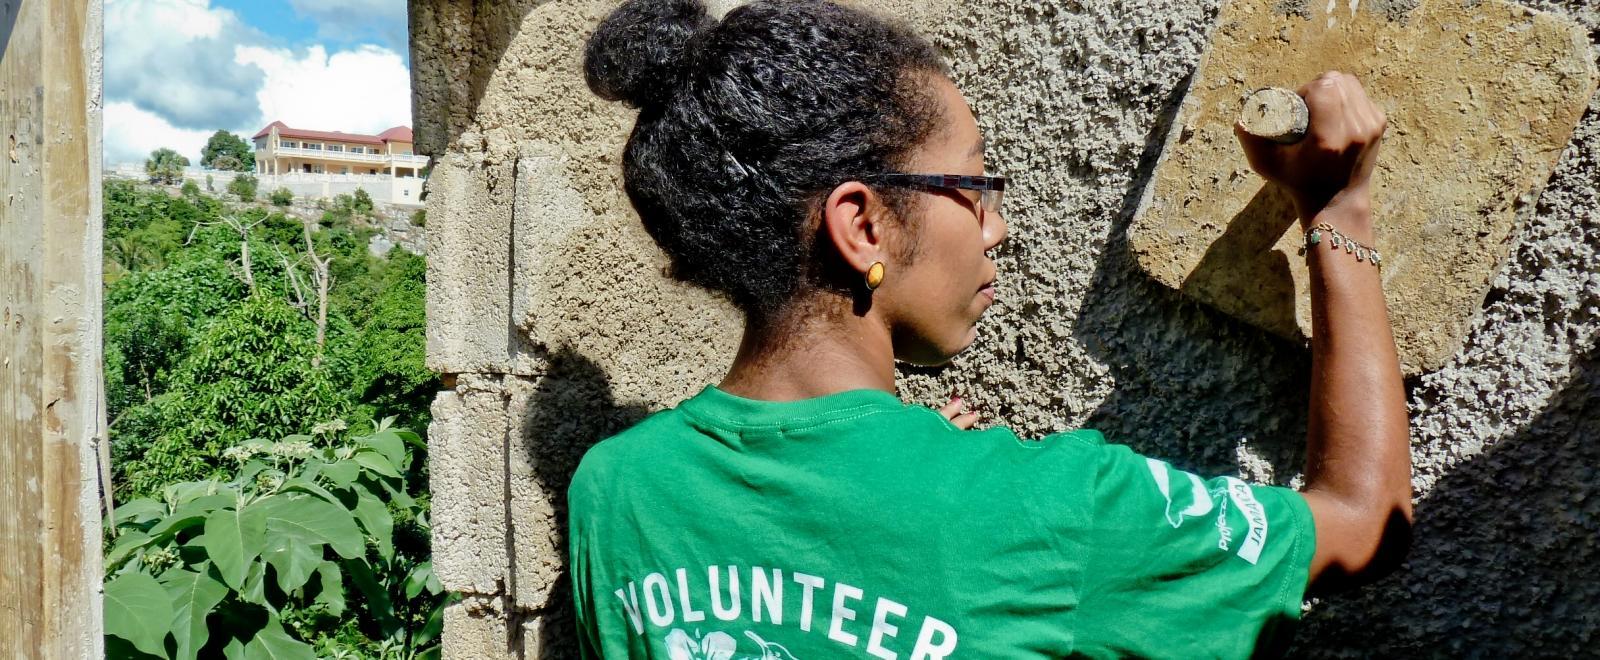 A Projects Abroad volunteer helps with plastering a wall during her volunteer building work abroad.